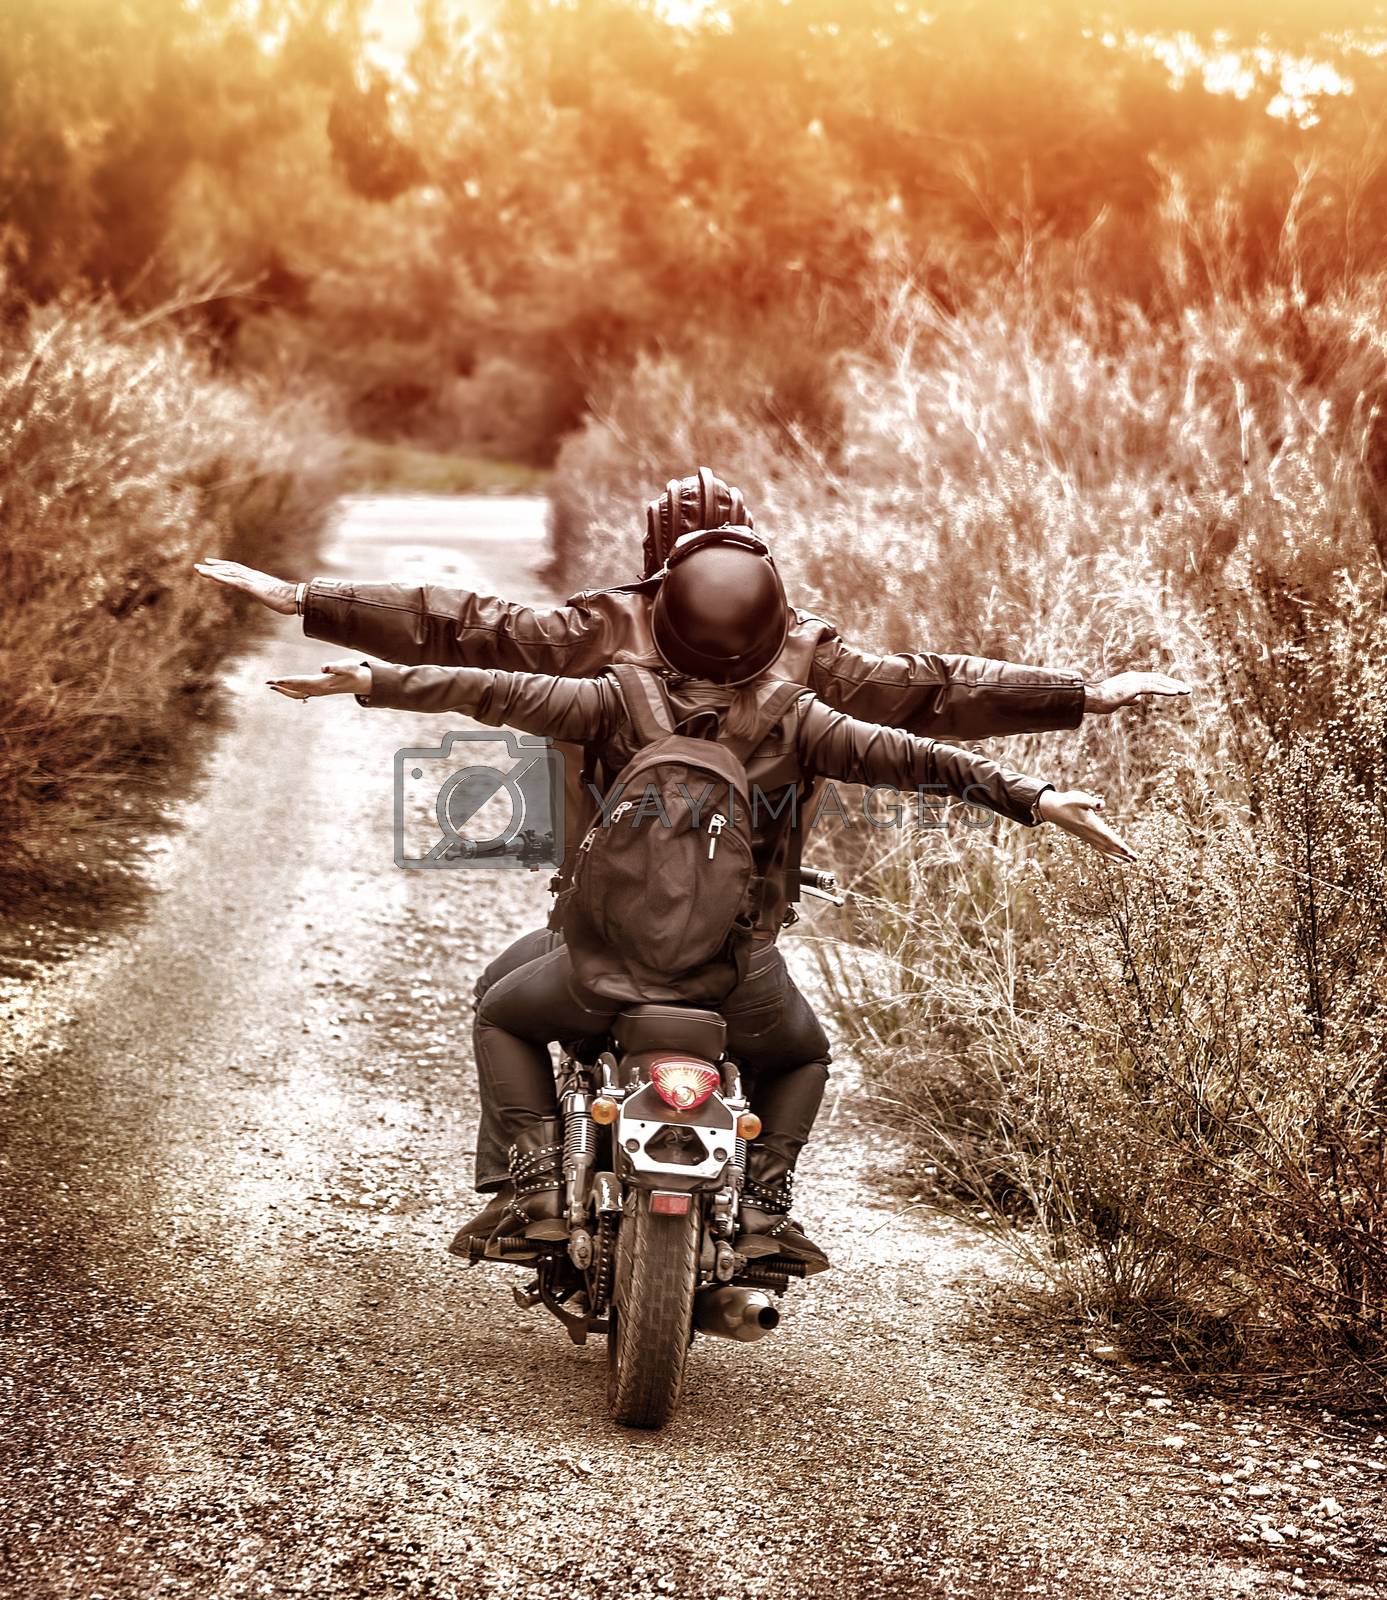 Royalty free image of Riding on motorbike with pleasure by Anna_Omelchenko